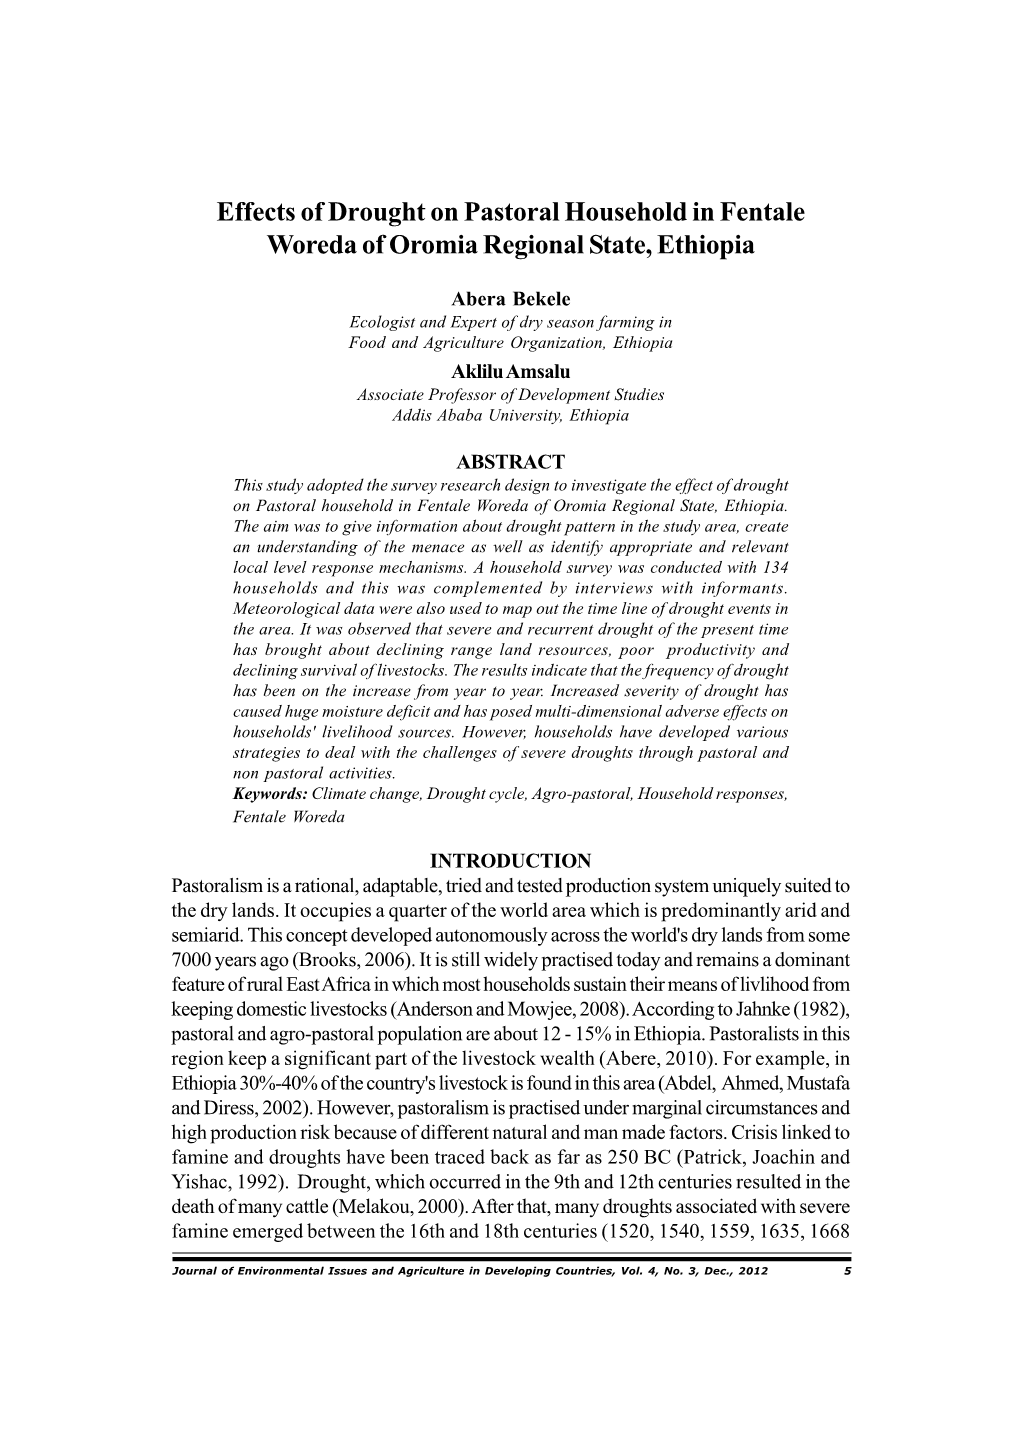 Effects of Drought on Pastoral Household in Fentale Woreda of Oromia Regional State, Ethiopia